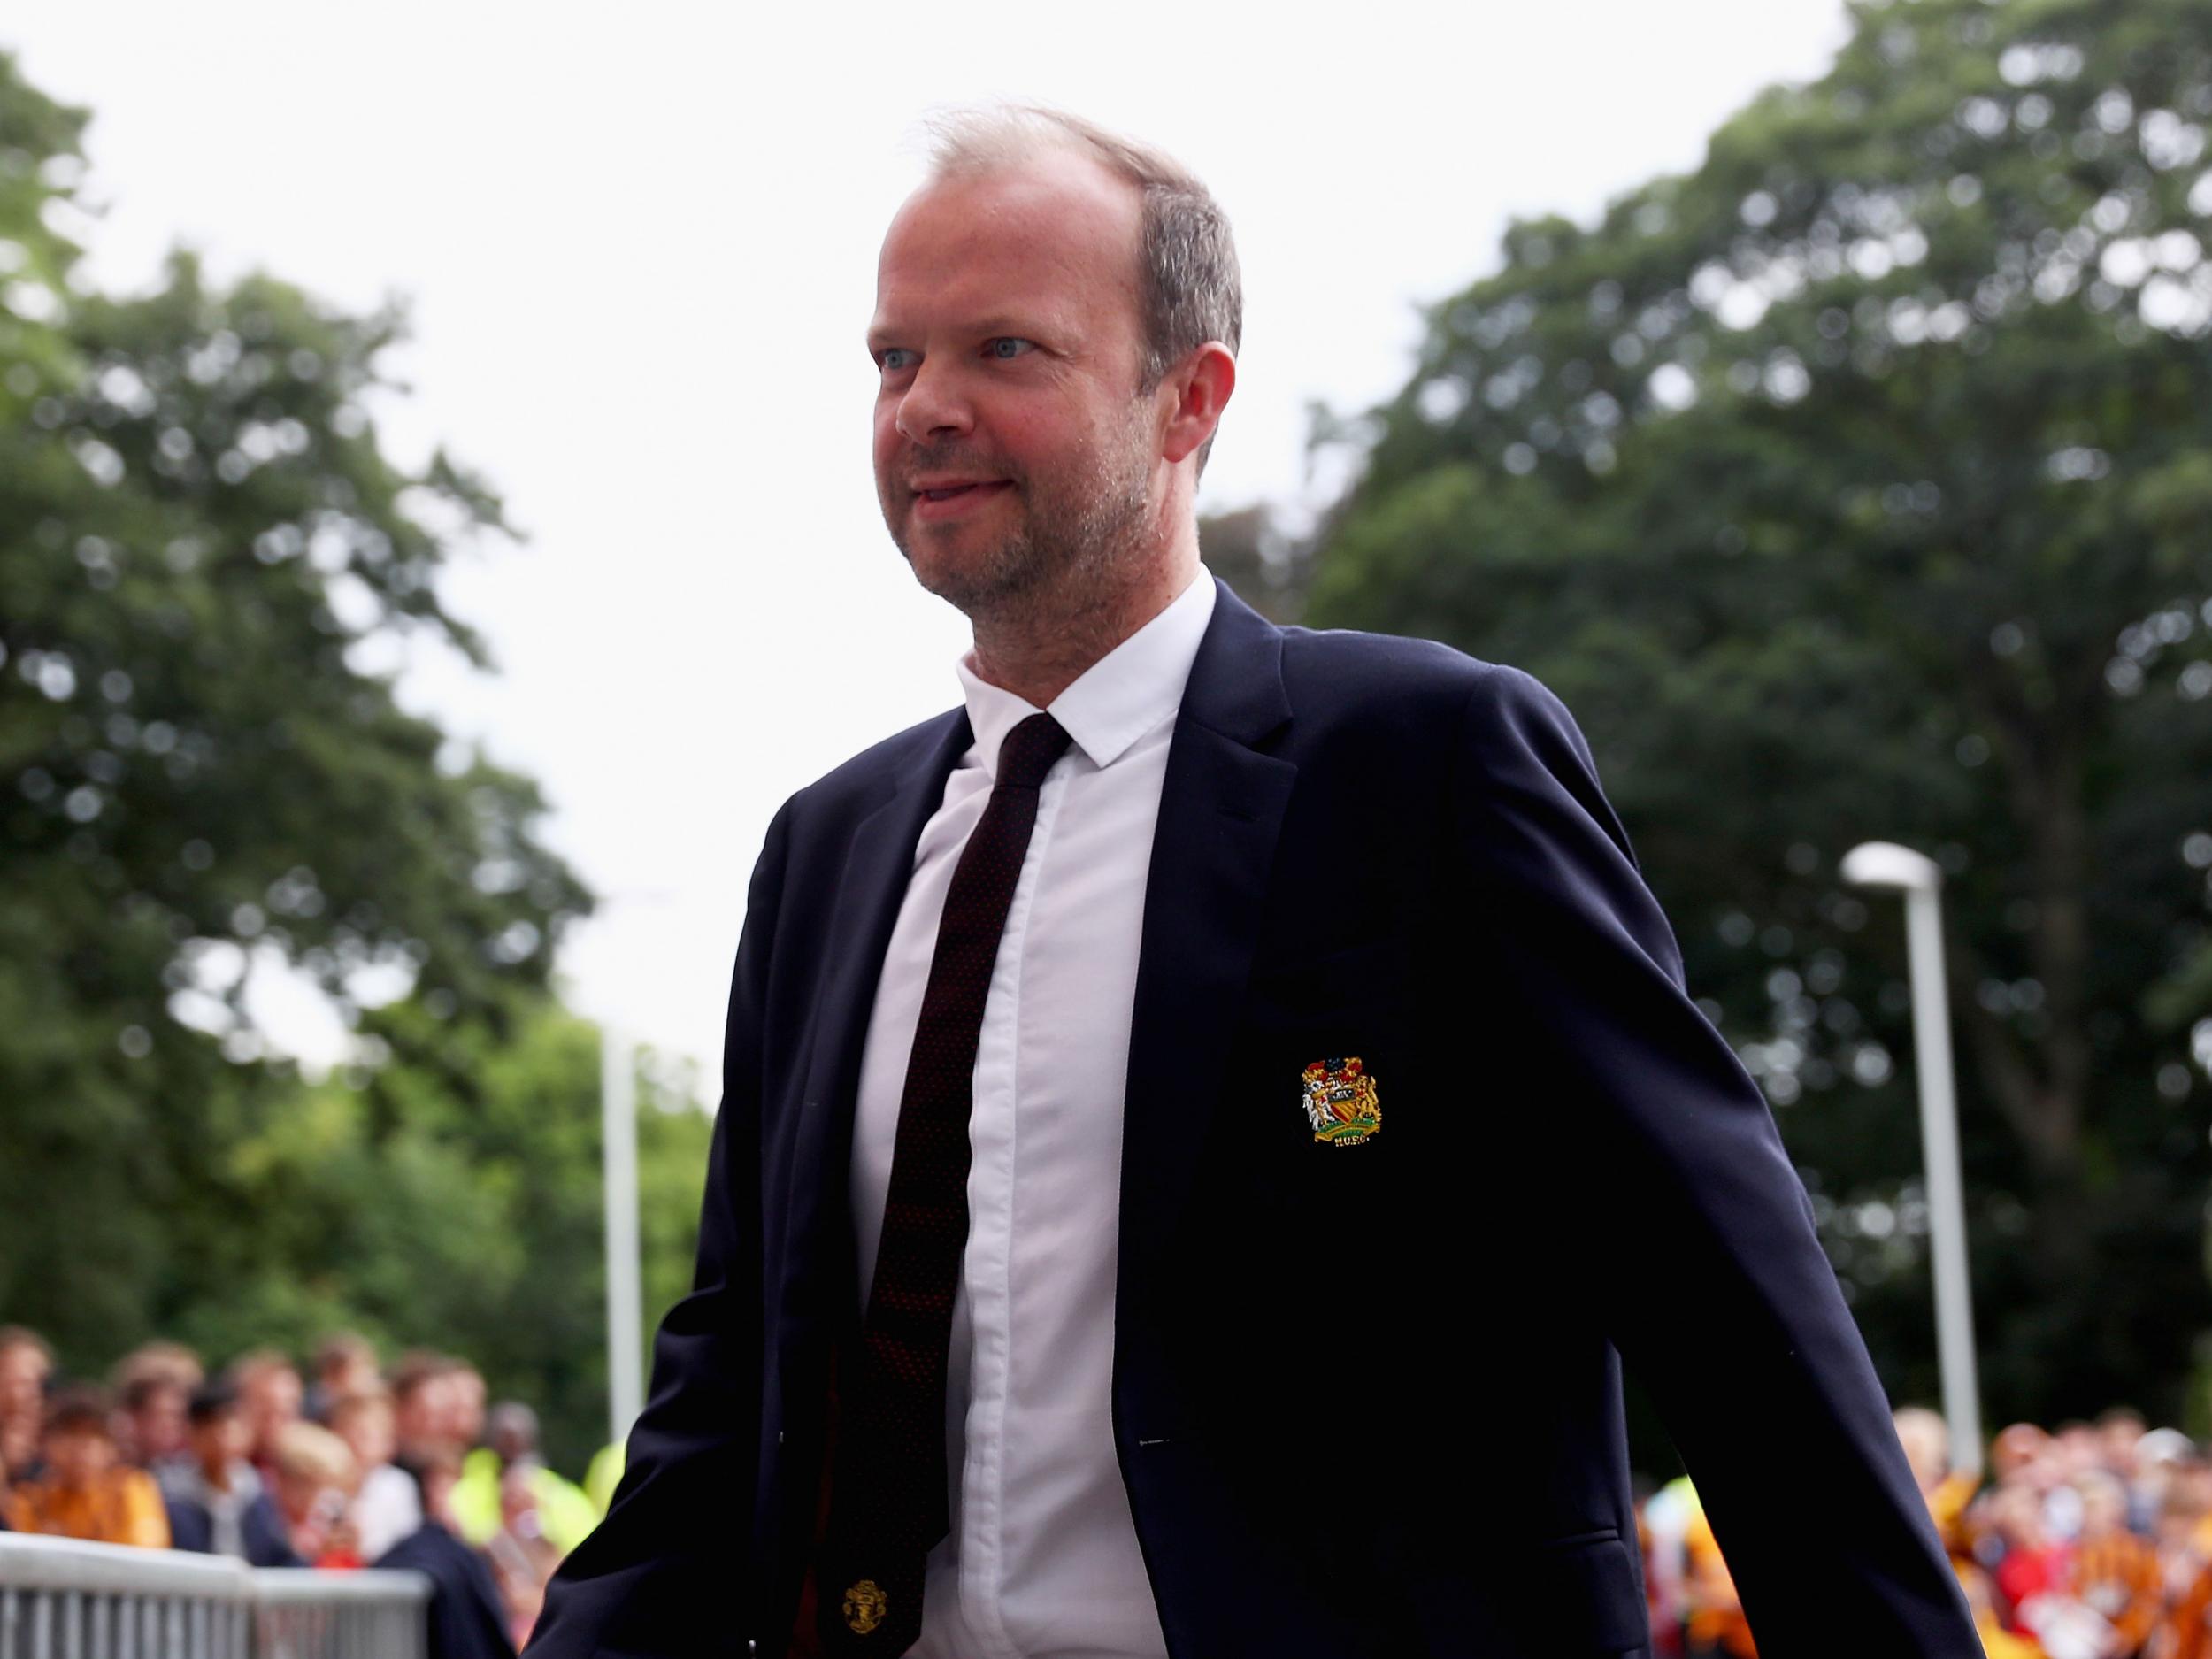 Ed Woodward admitted Manchester United's start to the season has been 'mixed'